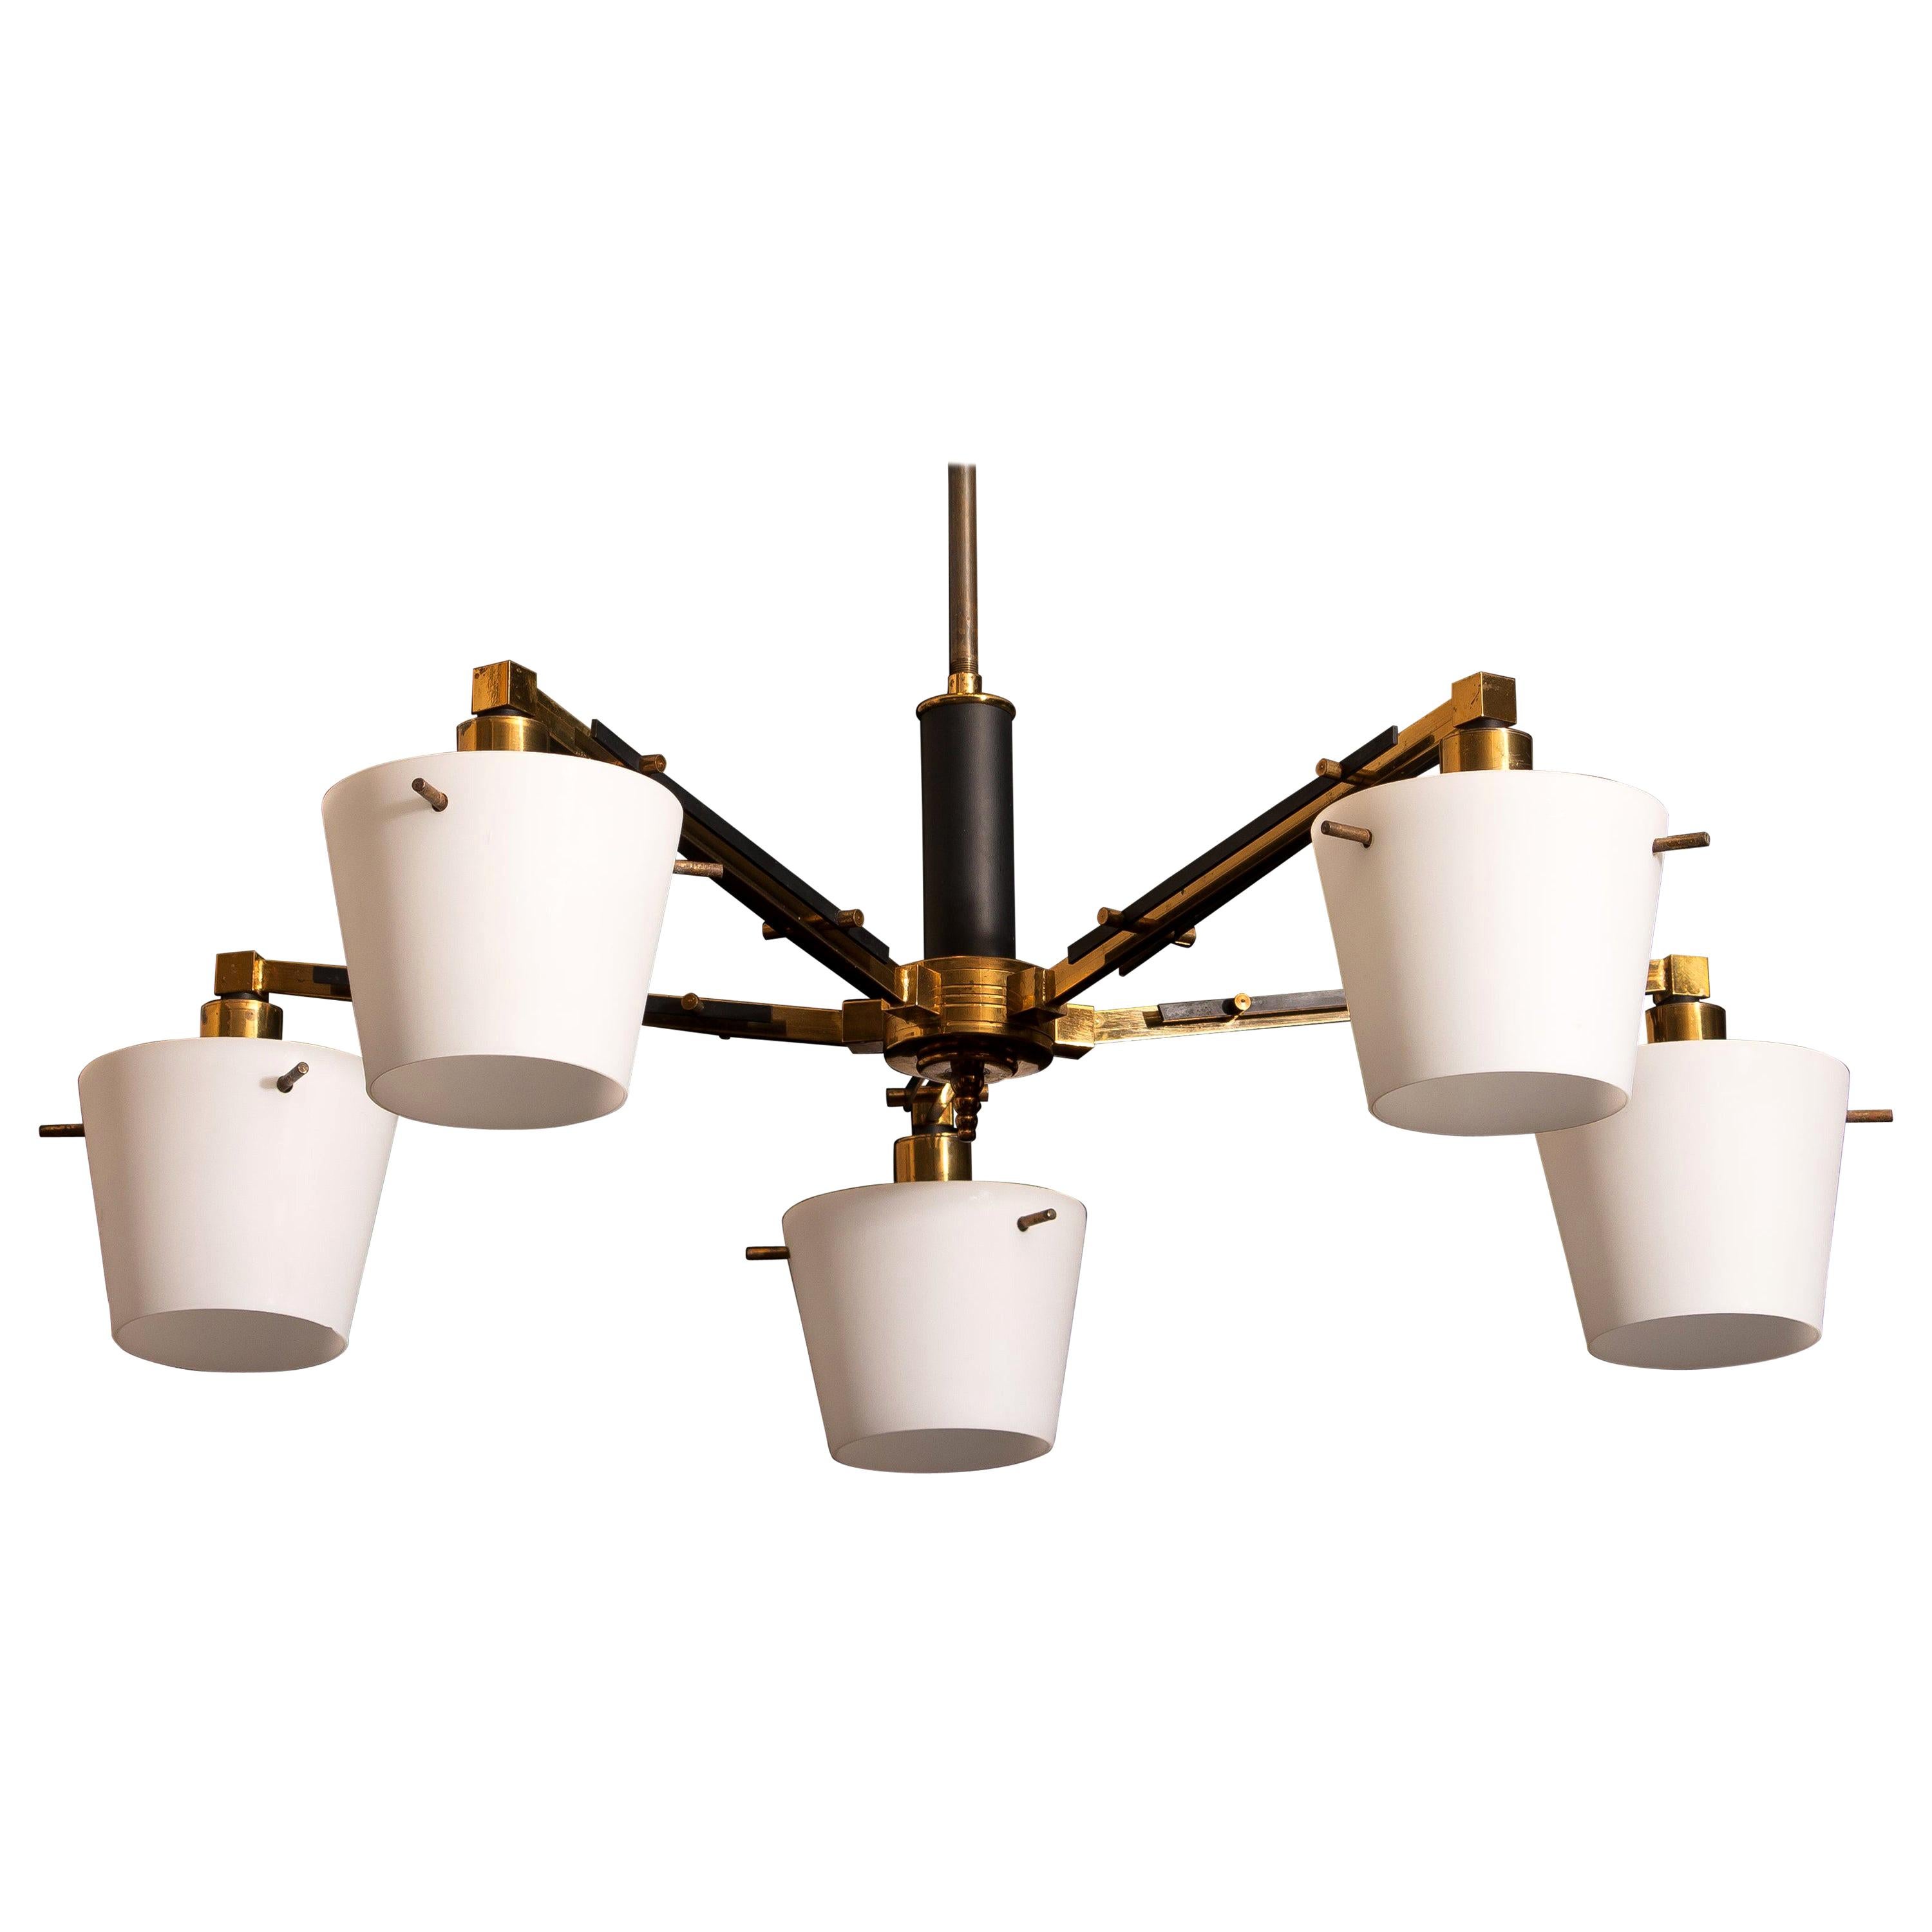 Beautiful and original midcentury chandelier with five frosted white glass shades on a brass frame, Italy. Period: 1950s. Five-light.
Technical 100% with screw bulbs size E14 / 17.
The dimensions are Ø of the fixture, 65 cm / 26 inch. Total height